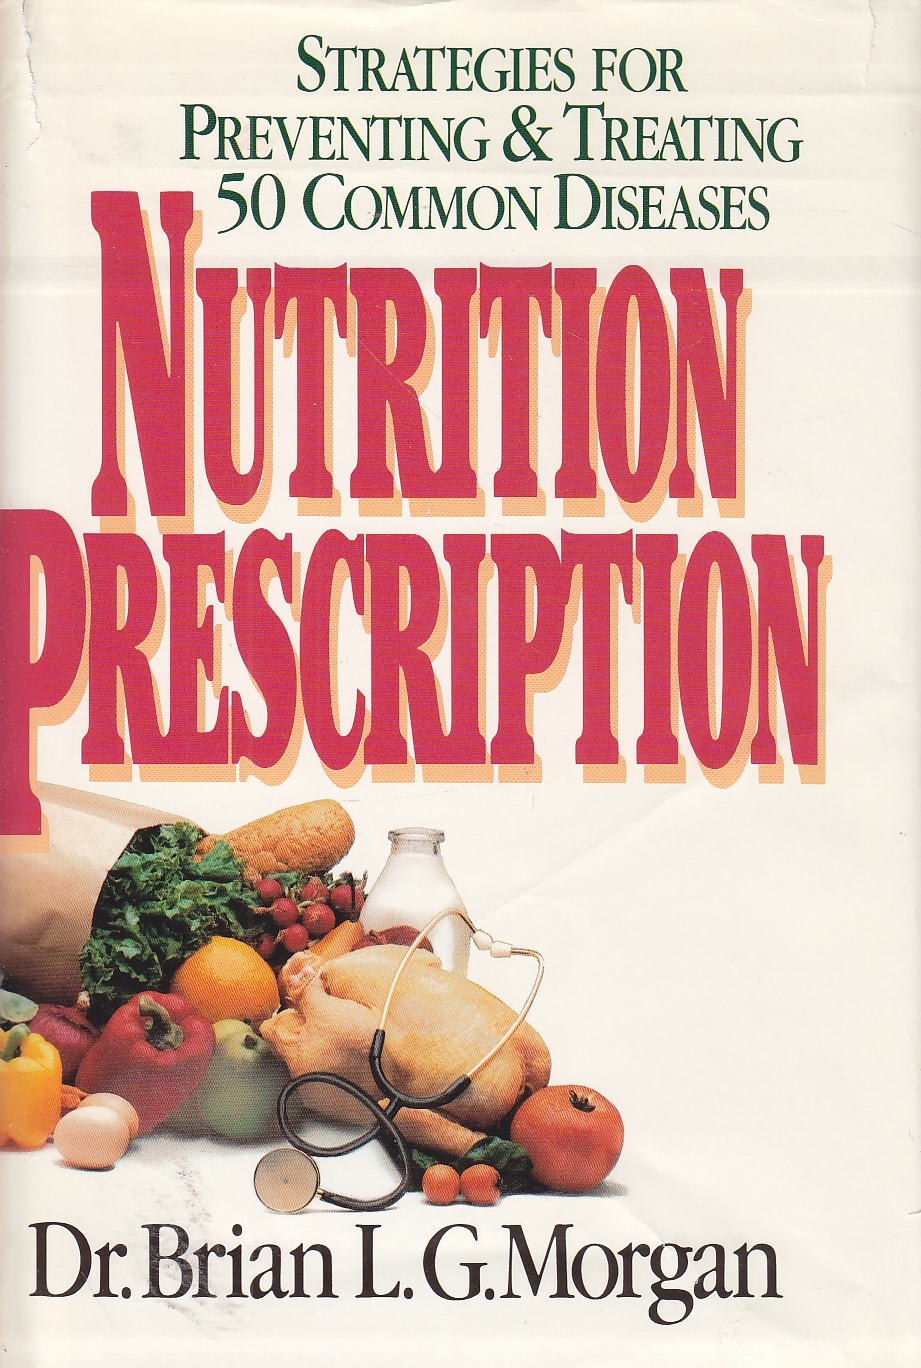 Image for Nutrition Prescription Strategies for Preventing & Treating 50 Common Diseases